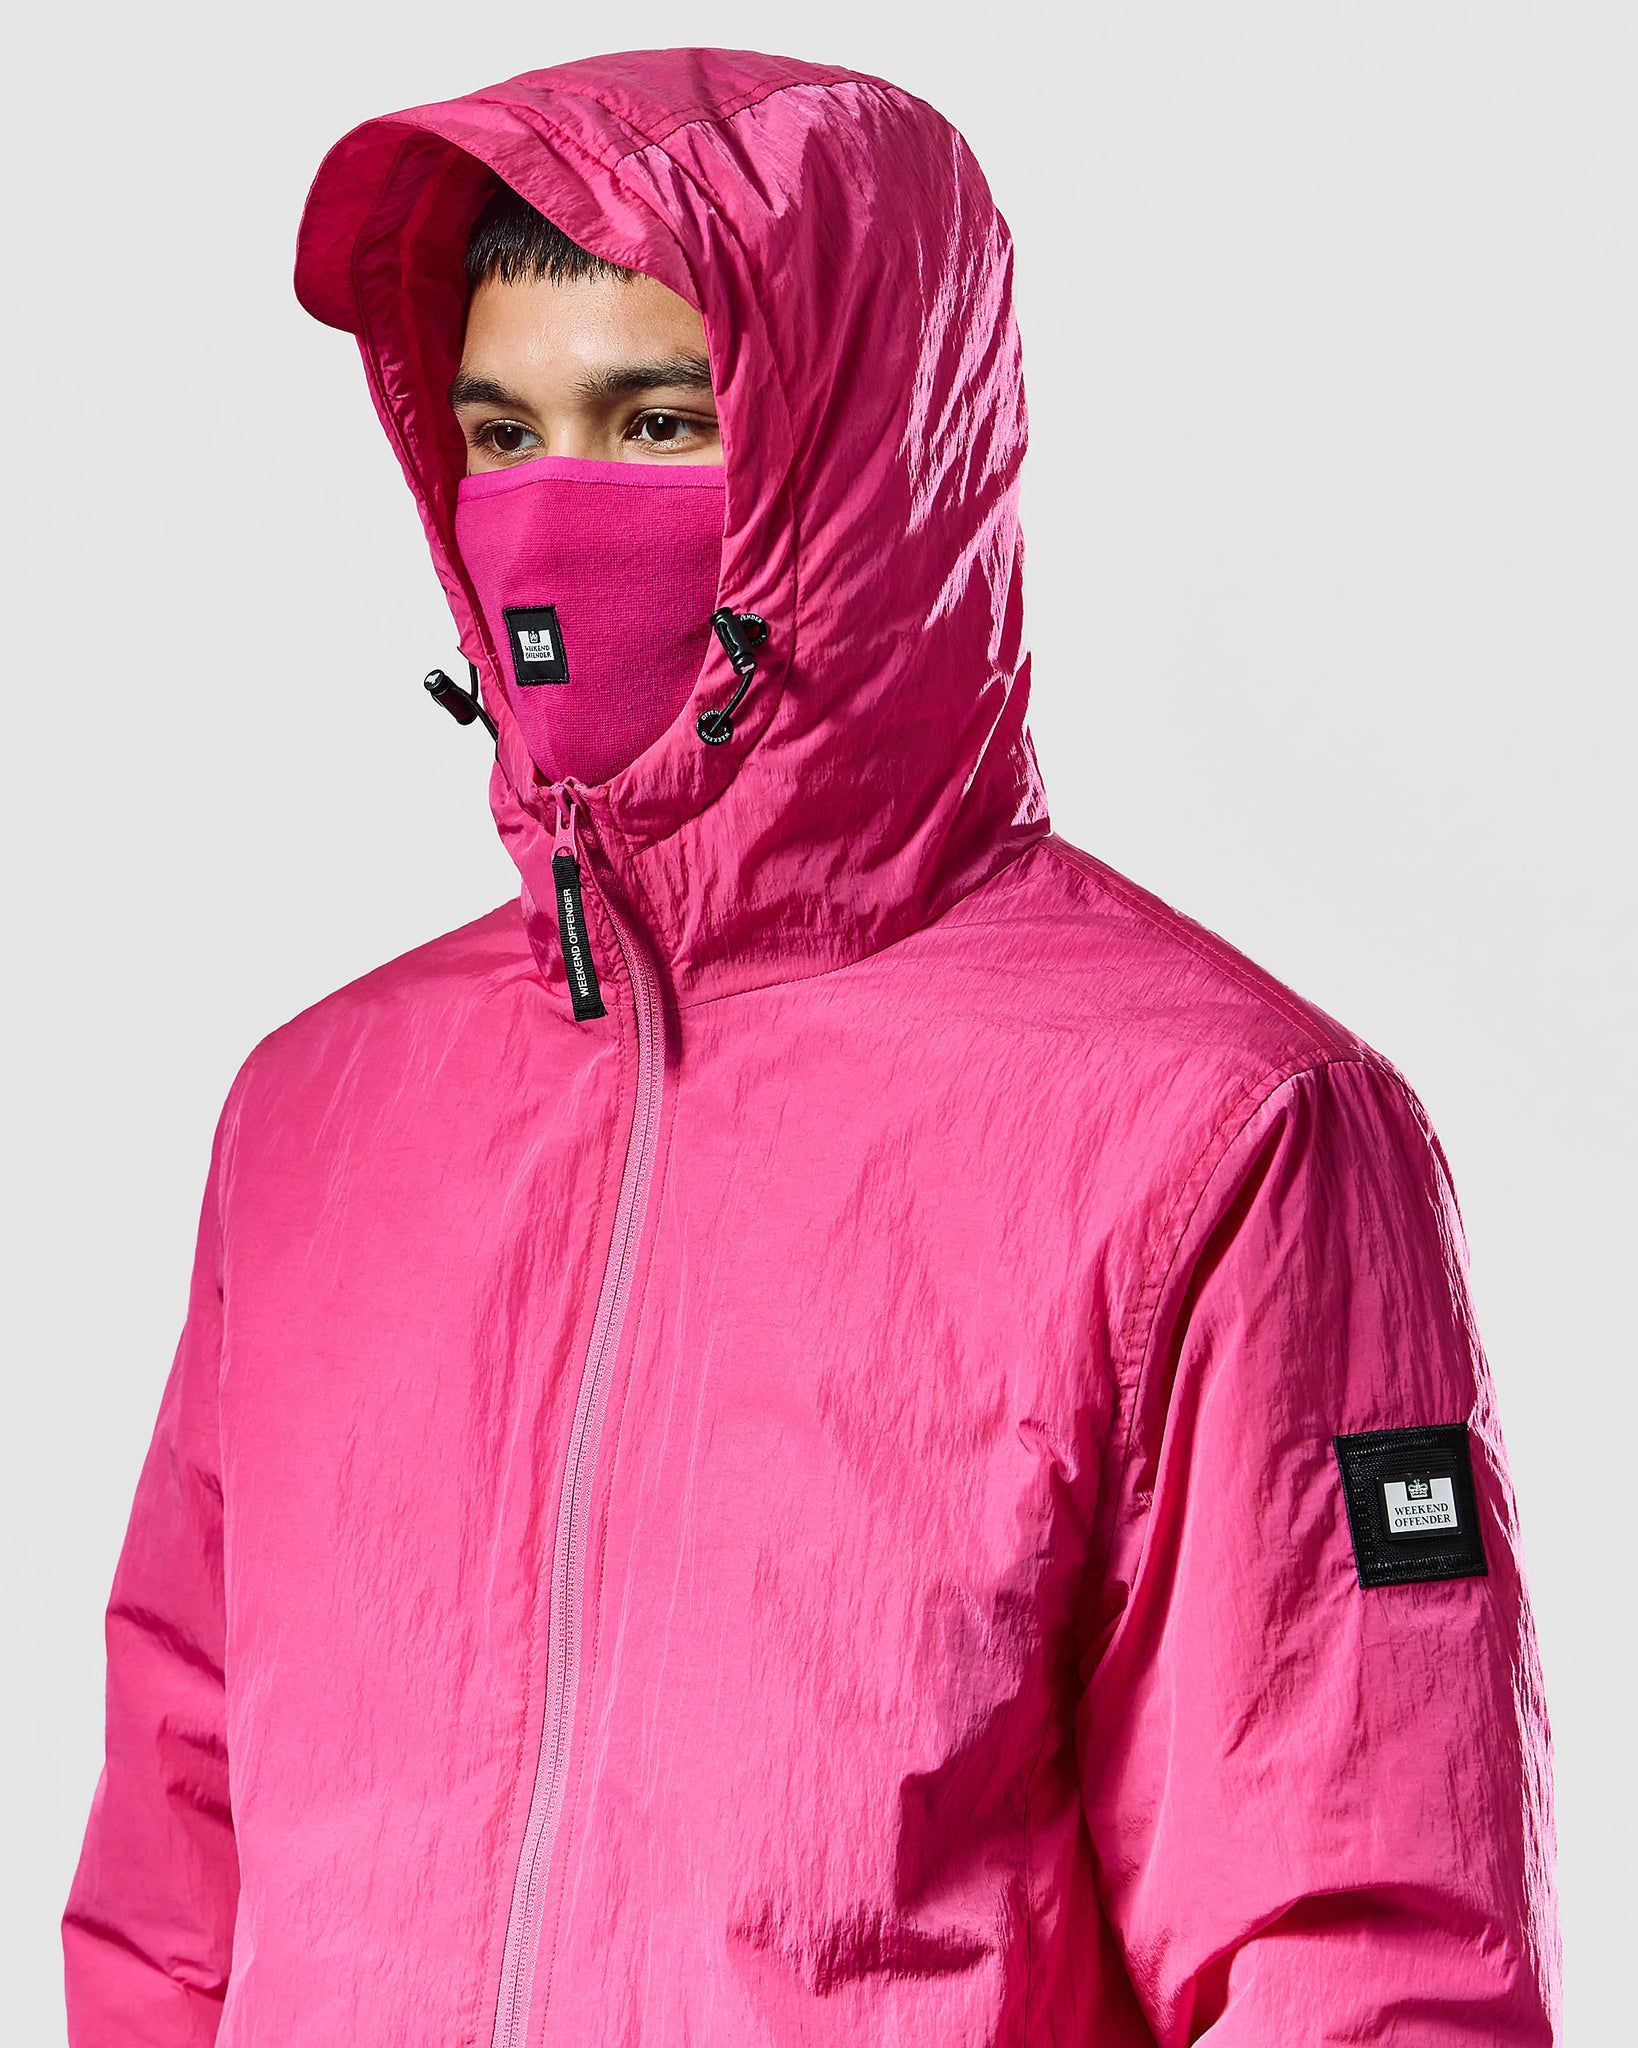 Technician Thermo Jacket Cerise Pink